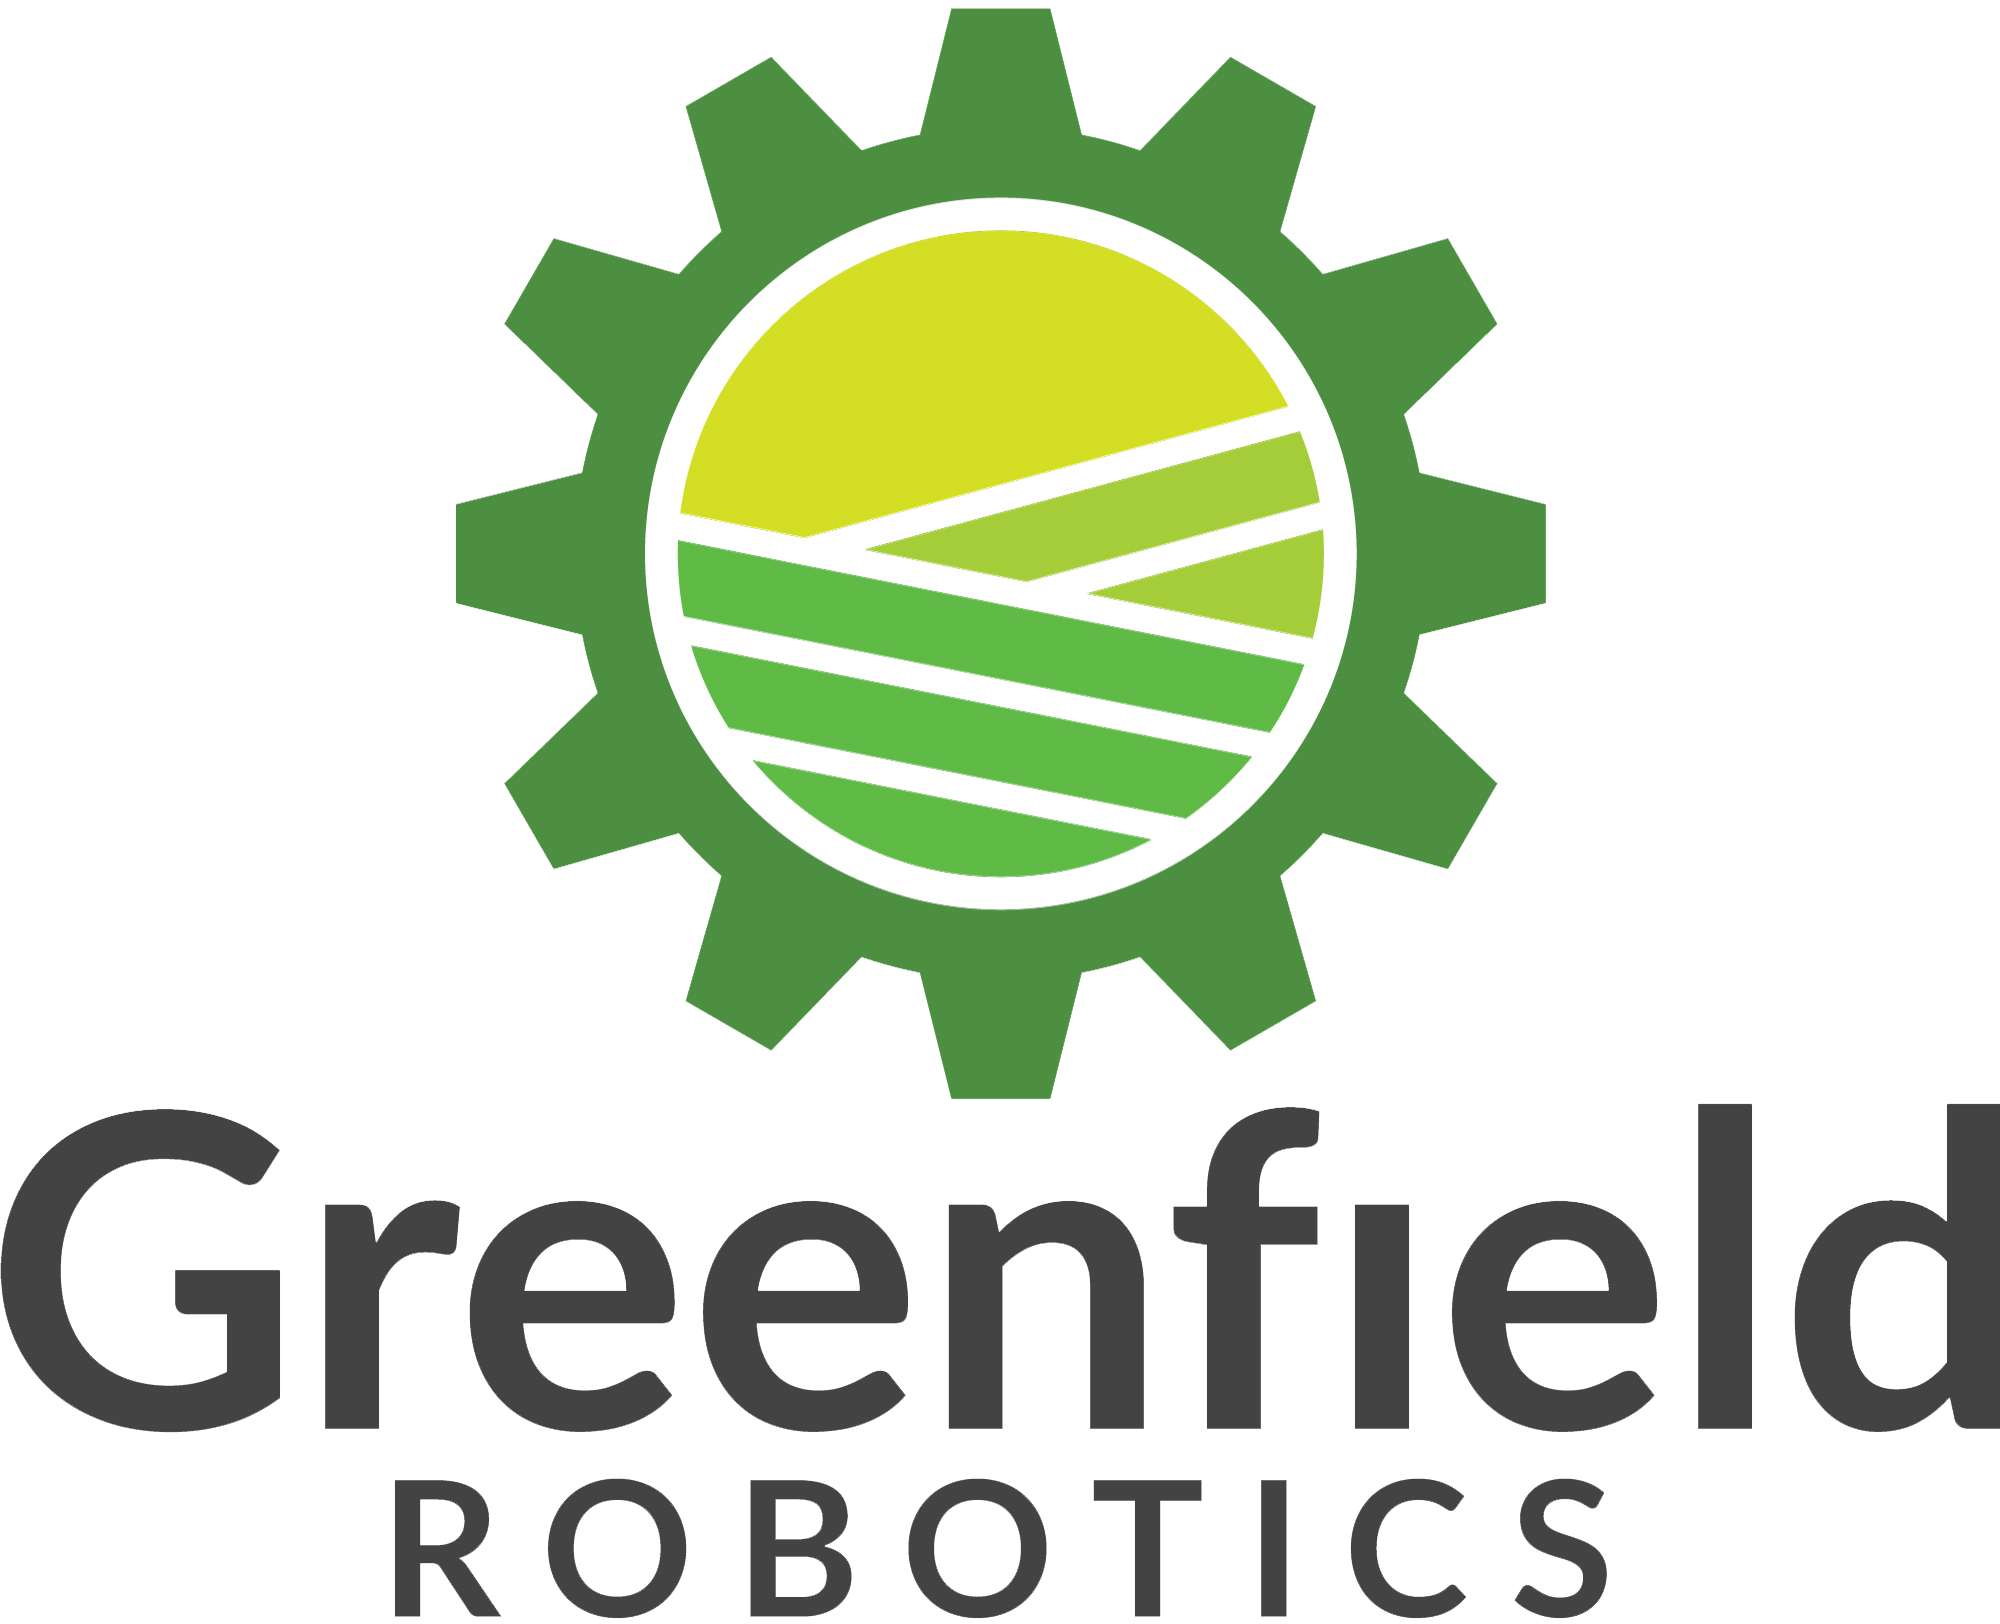 A dark and light green image that looks like a cog with fields drawn in the center, underneath which is written Greenfield Robotics